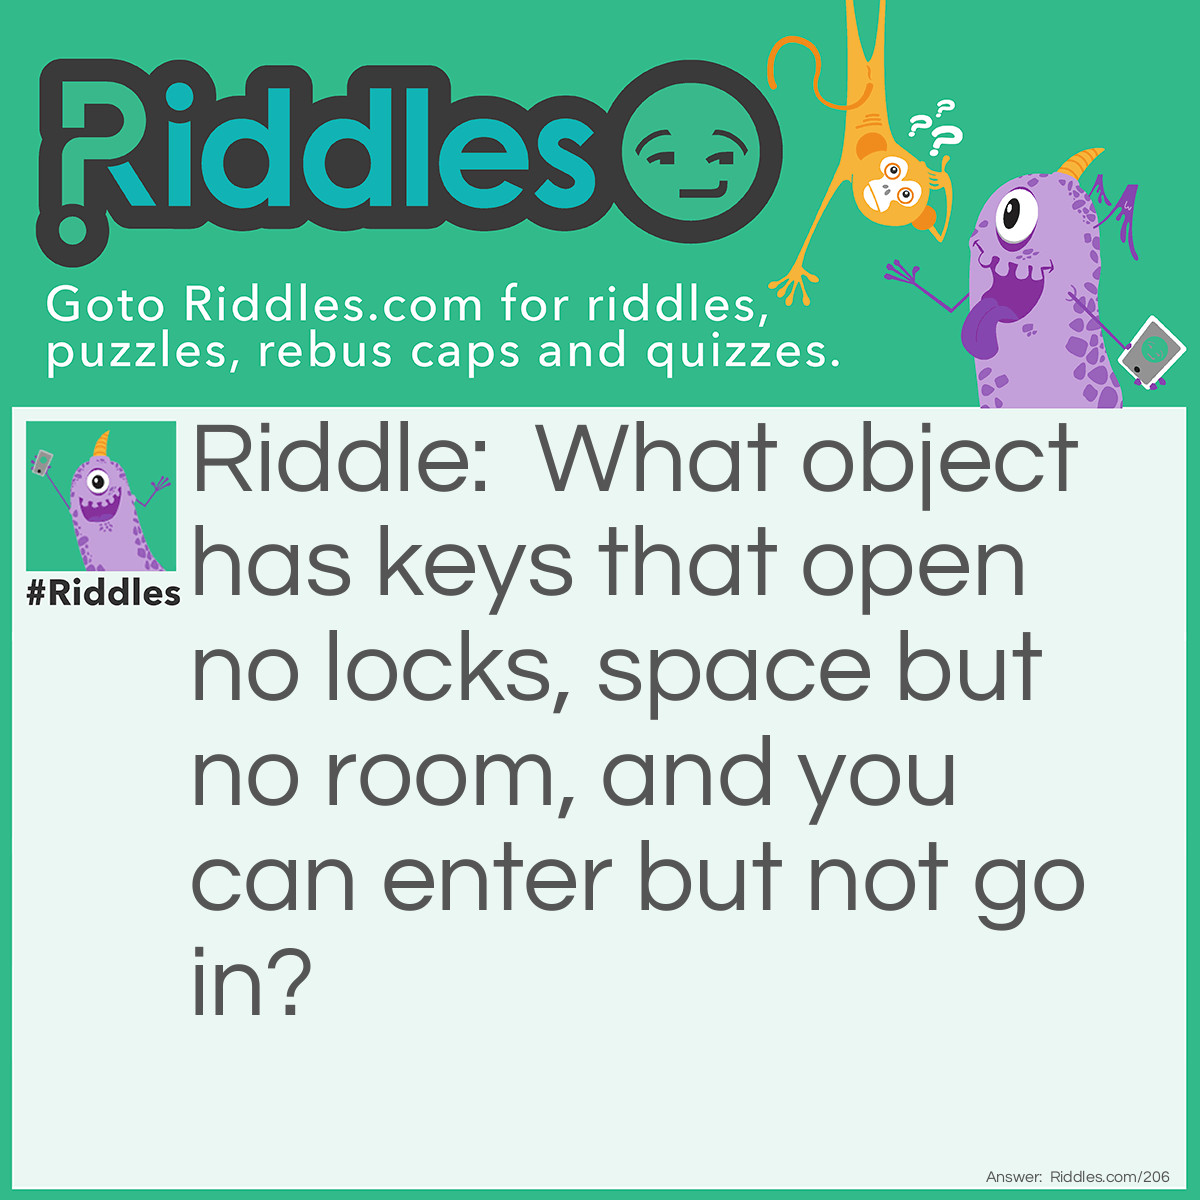 Riddle: What has keys that open no locks, space but no room, and you can enter but not go in? Answer: A computer keyboard.